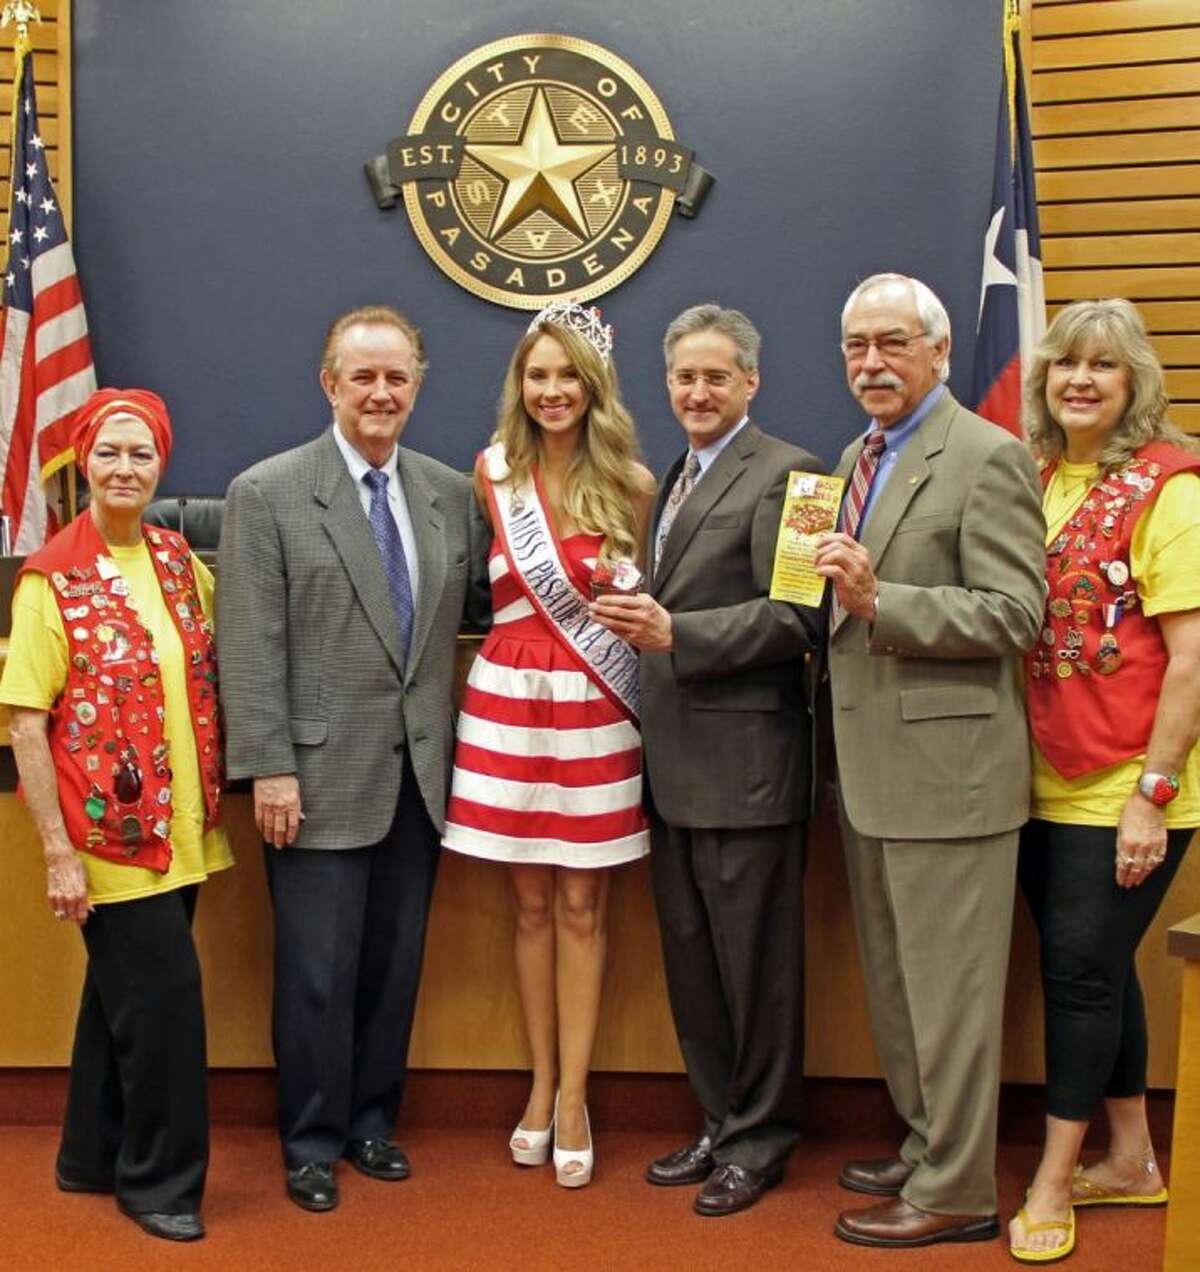 Pasadena Strawberry Festival volunteers were recognized by Mayor Johnny Isbell and the City Council at a recent council meeting. Pictured left to right: Celinda Welch Bennett, Mayor Isbell, Queen Caitlyn Amyx, Councilmember Darrell Morrison, Councilmember Phil Cayten and D'Juana Rae Oxford.